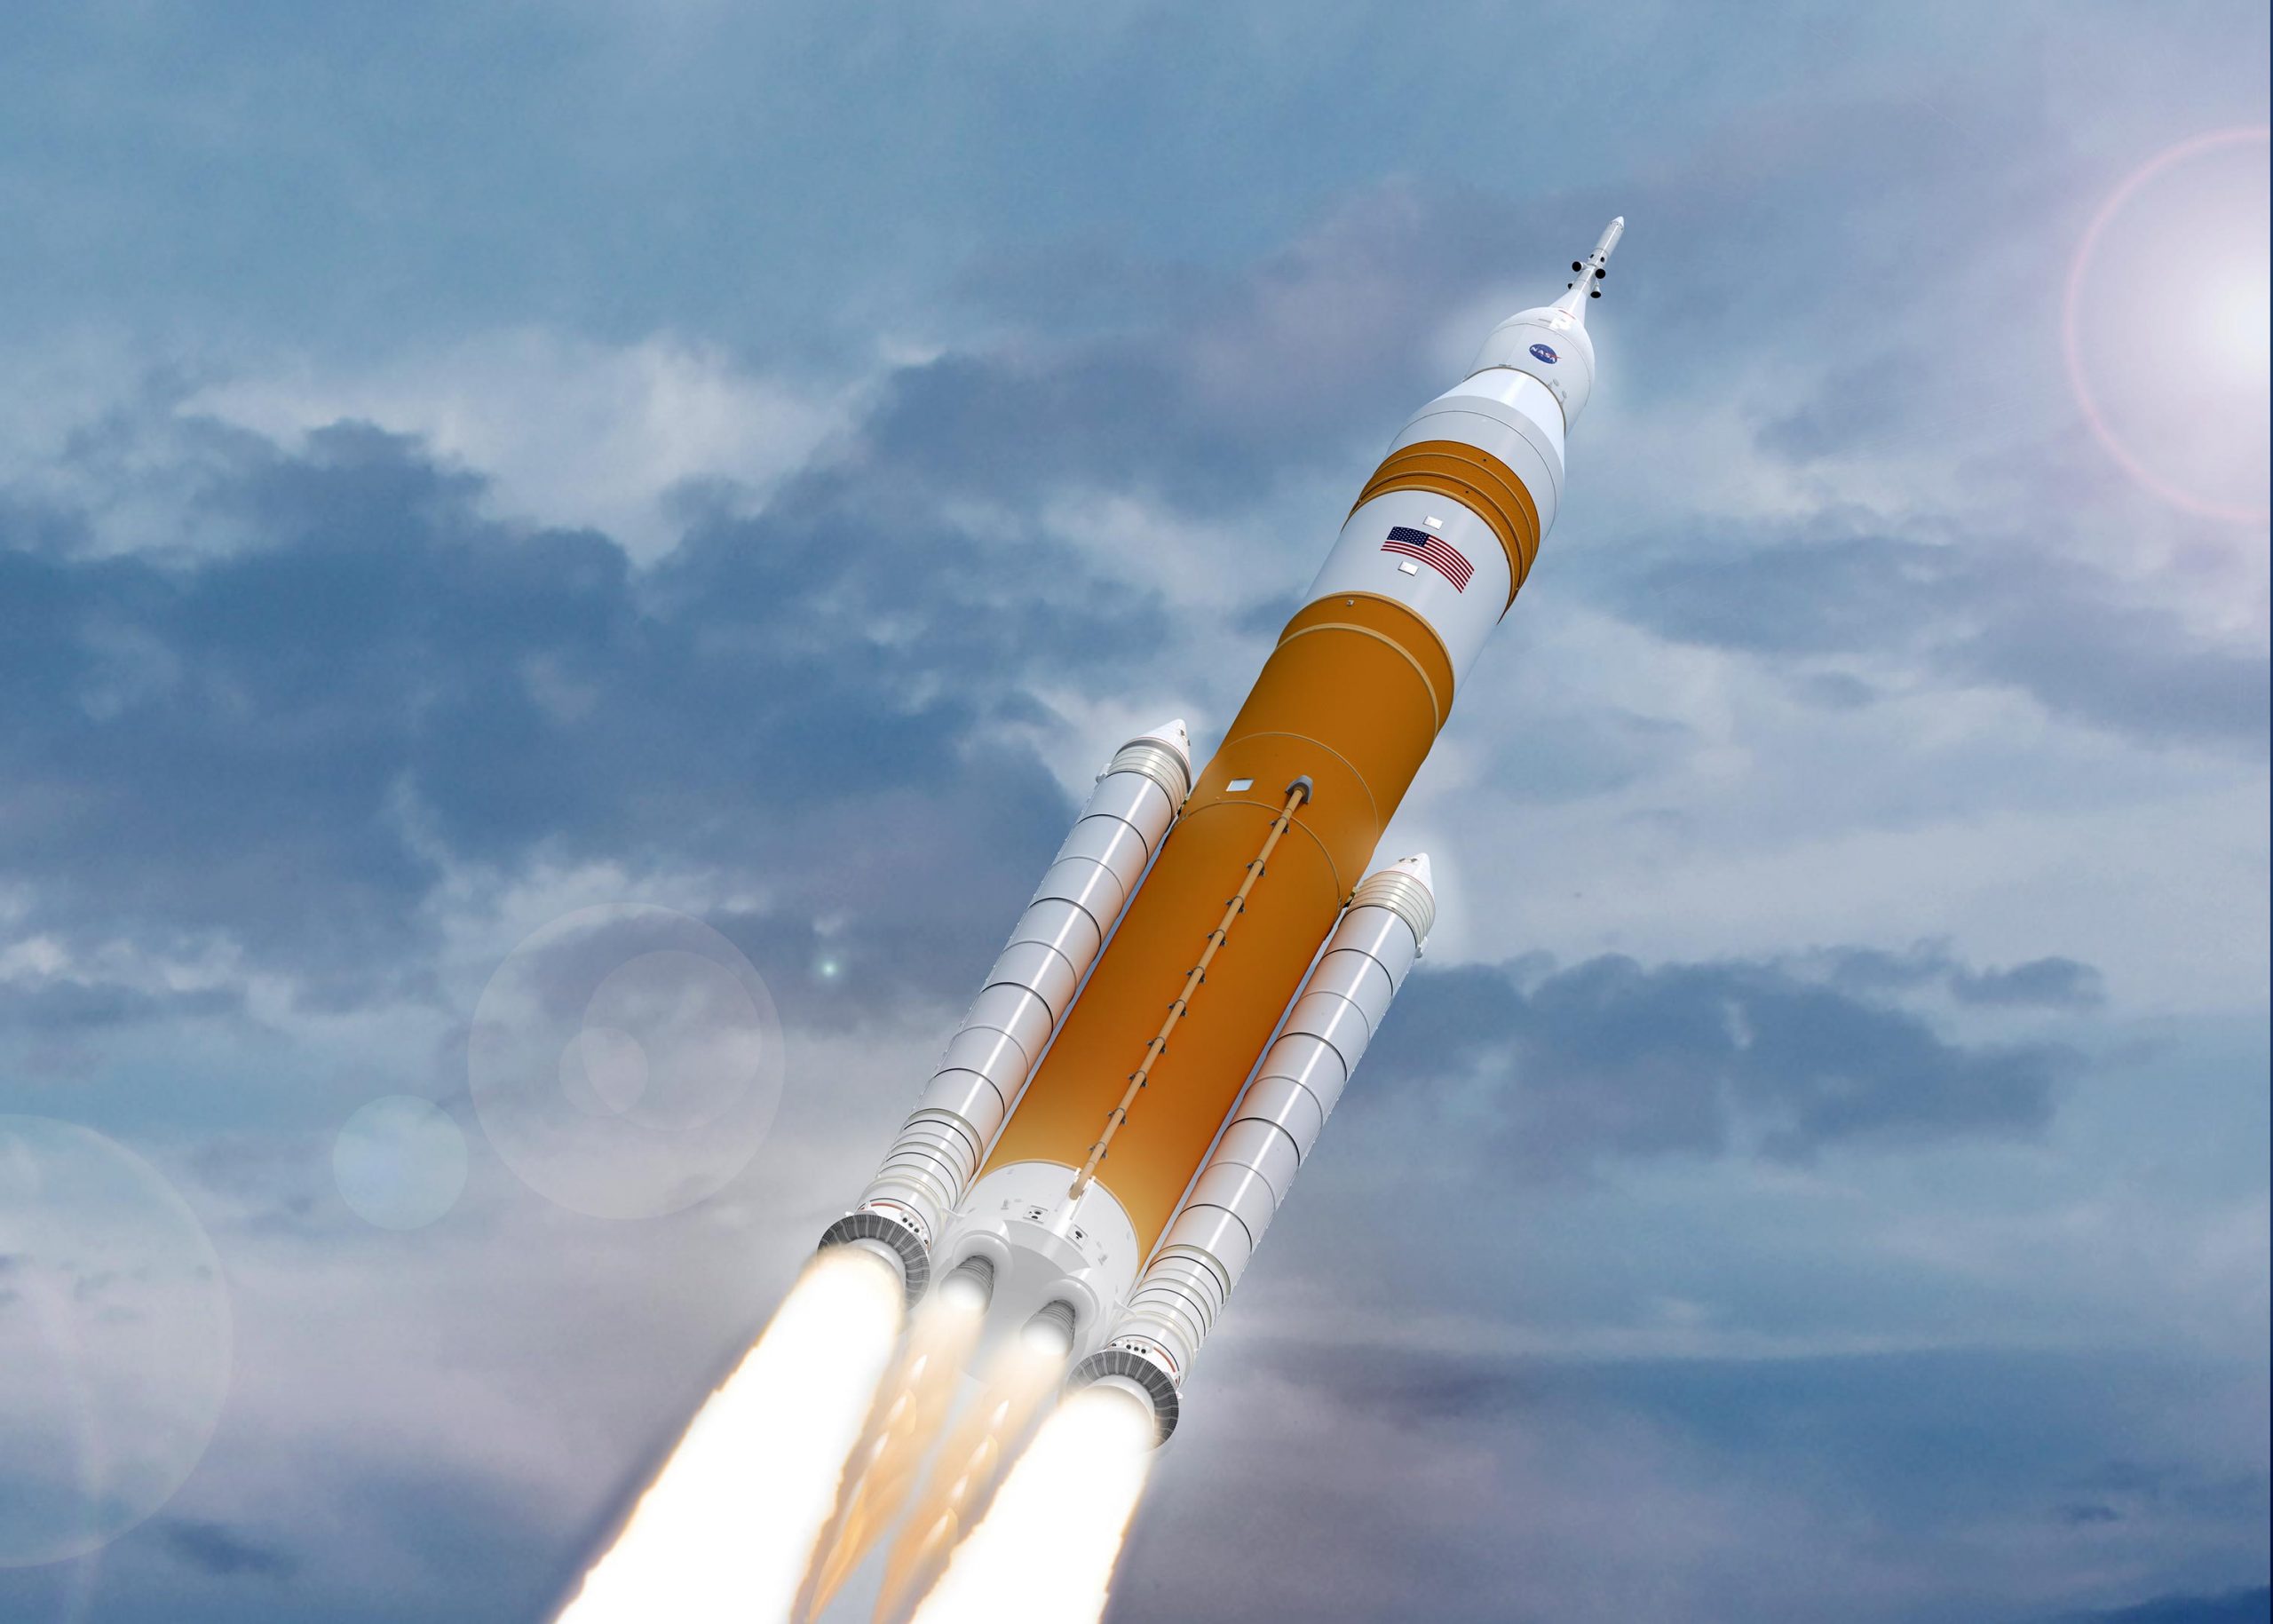 NASA intends to start up its enormous SLS moon rocket this month